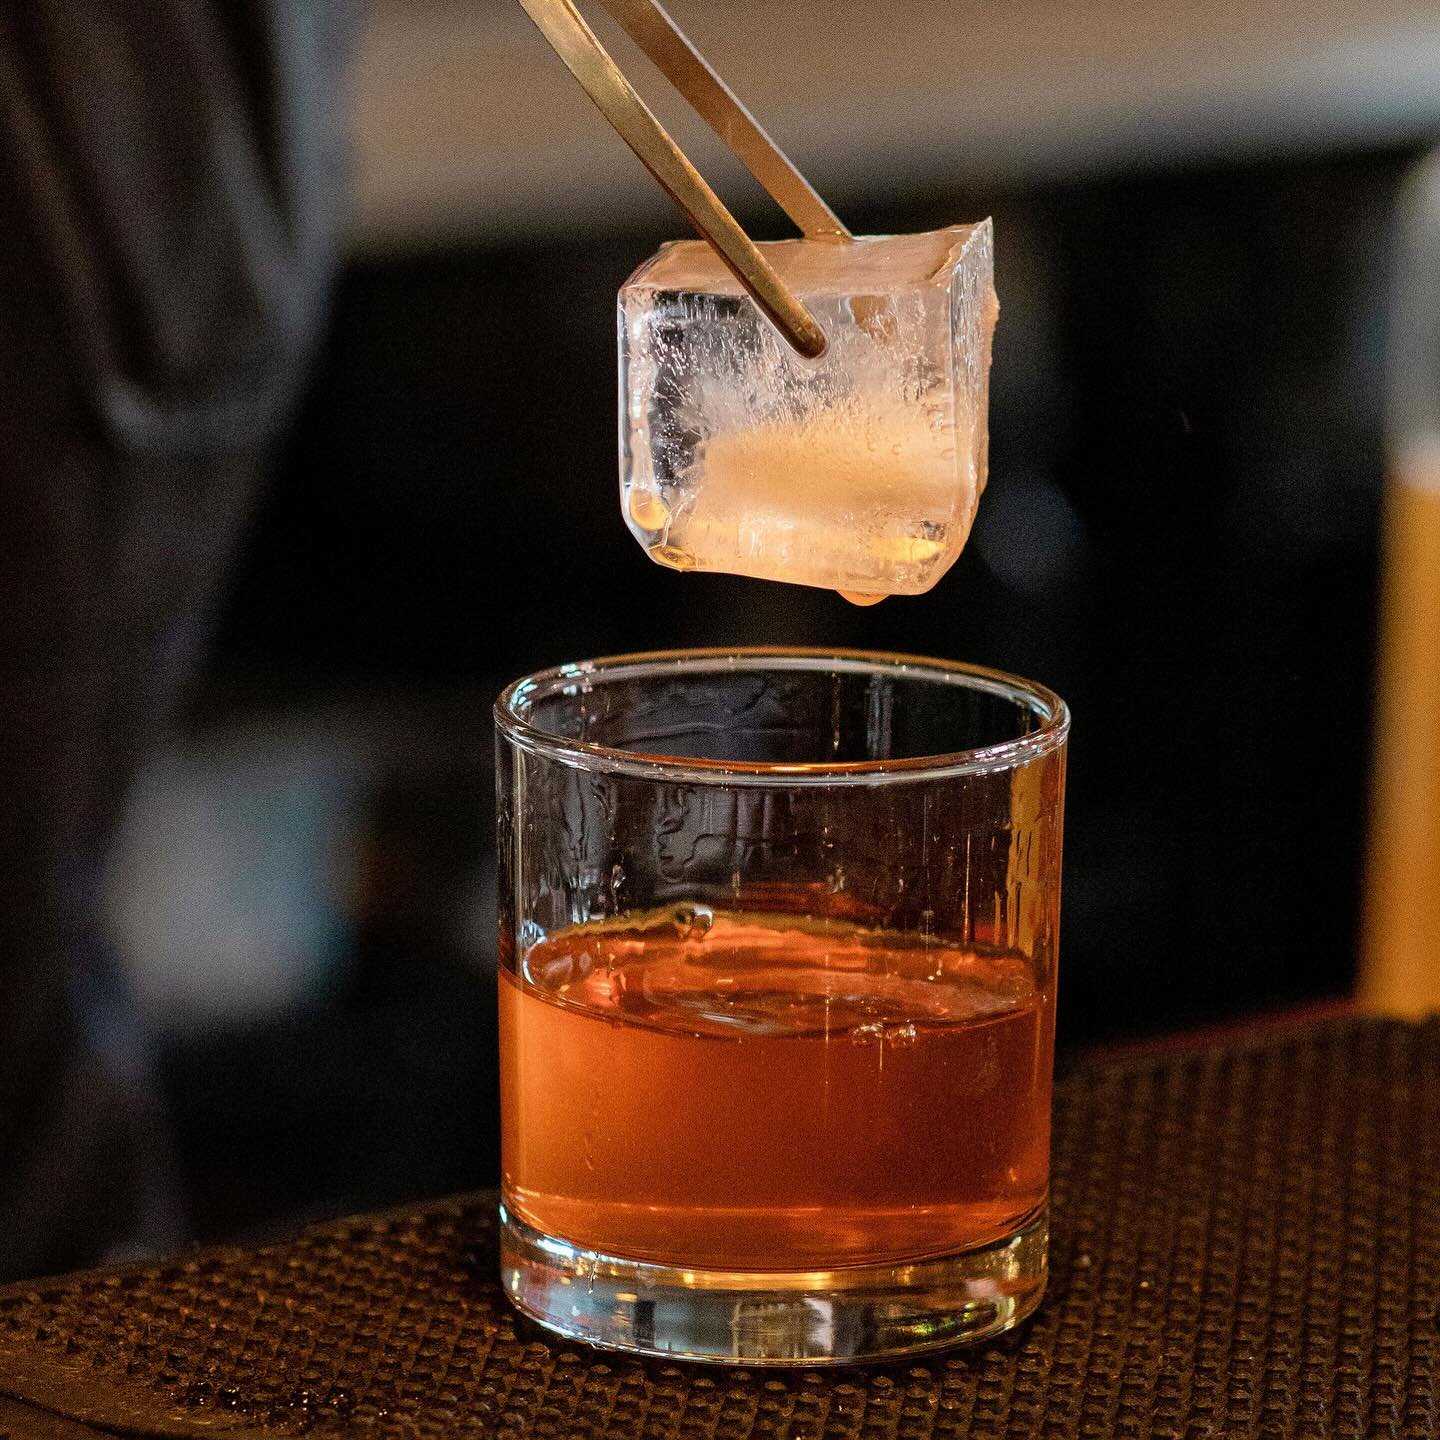 The story of a perfect cocktail 🥃

The Penny Pincher is made with:

Passionfruit, lychee, dragonfruit soju from Top Shelf, Suntory Toki Japanese Whiskey, Aperol, Passionfruit syrup, grapefruit bitters.

👉 @colehk22

See you tonight at Charlotte